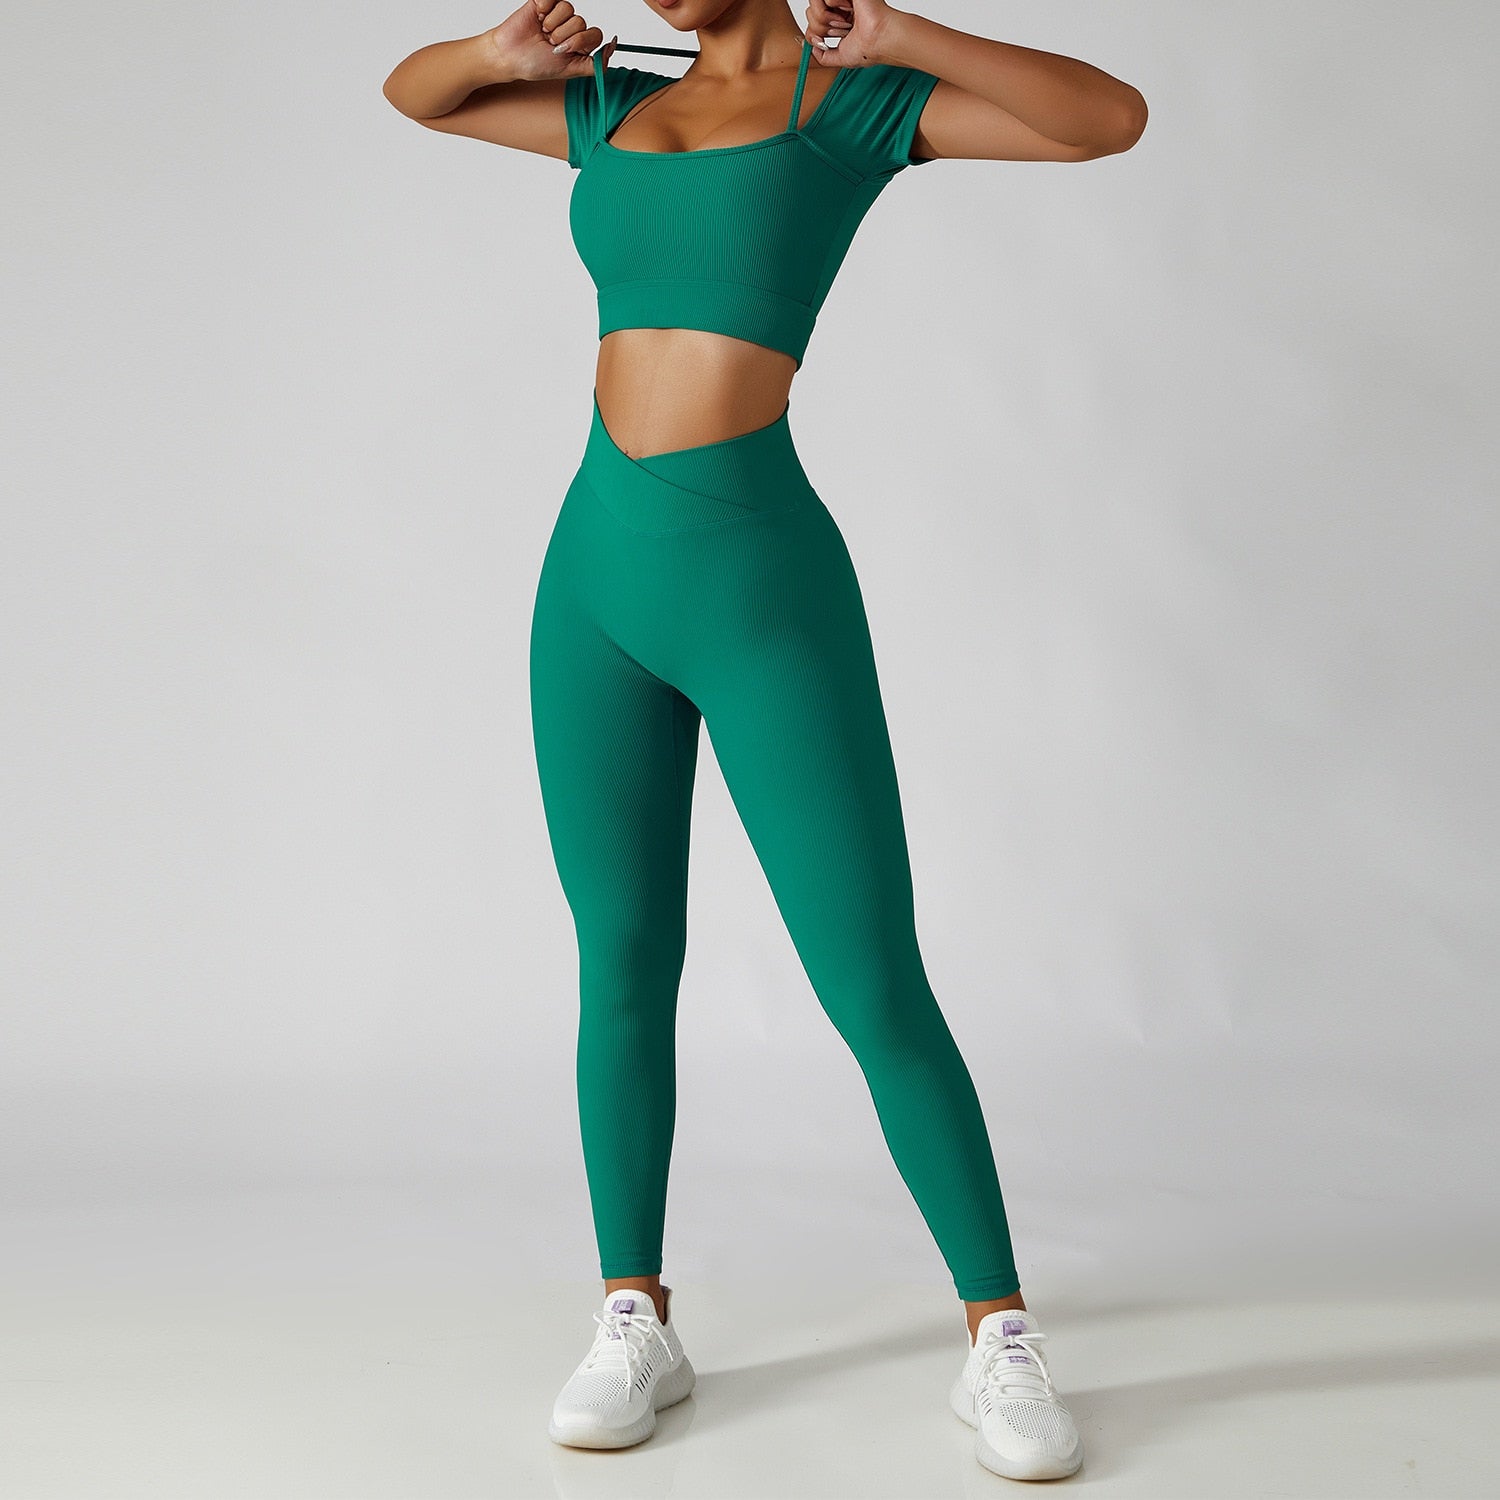 Women's Two Piece Green Ribbed Modern Short Sleeve Top High Waisted Yoga Leggings Workout Set